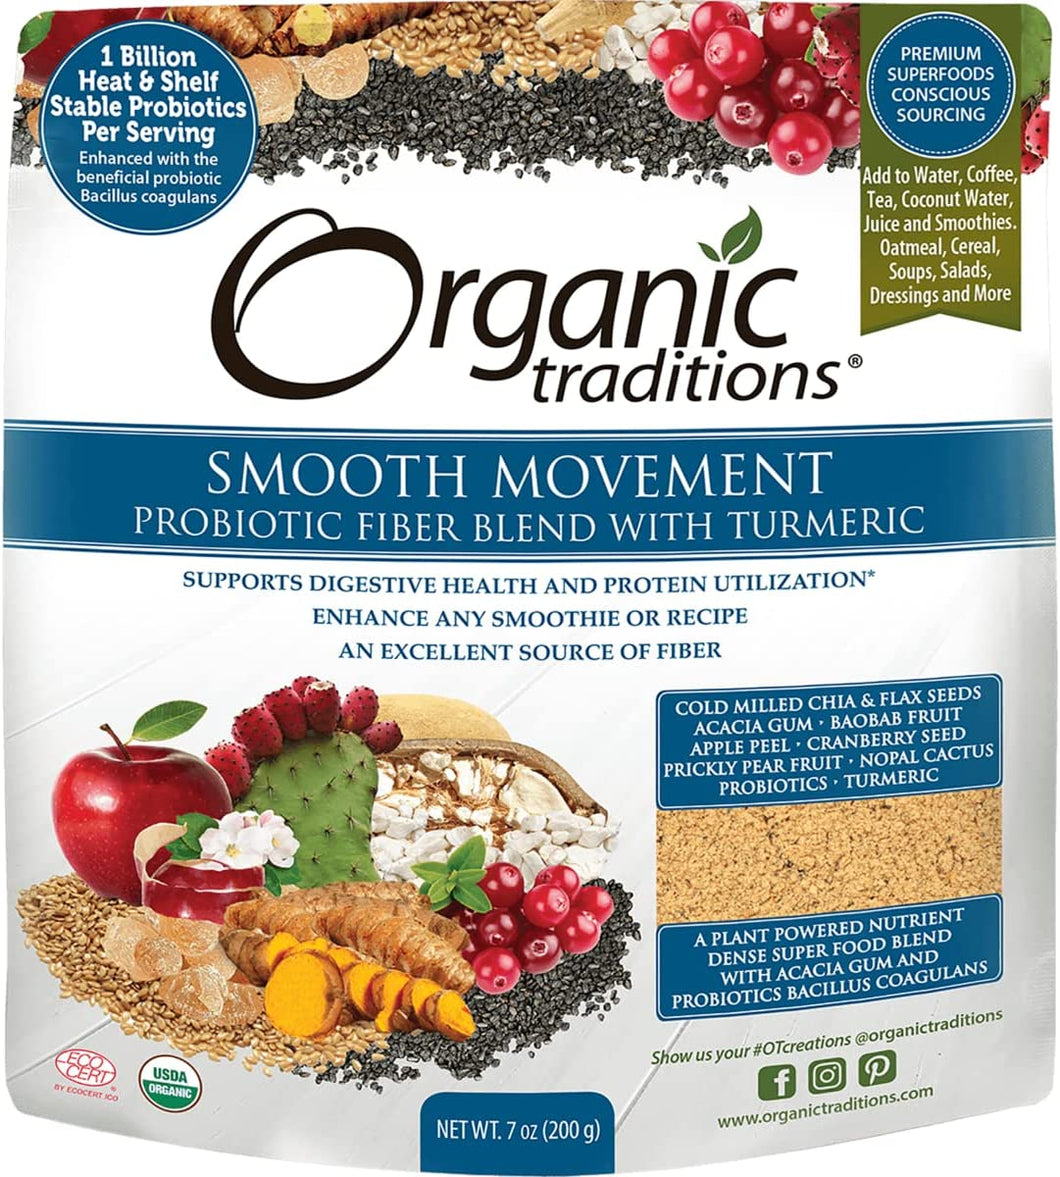 Organic Traditions Smooth Movement Probiotic Fiber Blend with Turmeric 7 oz Pkg